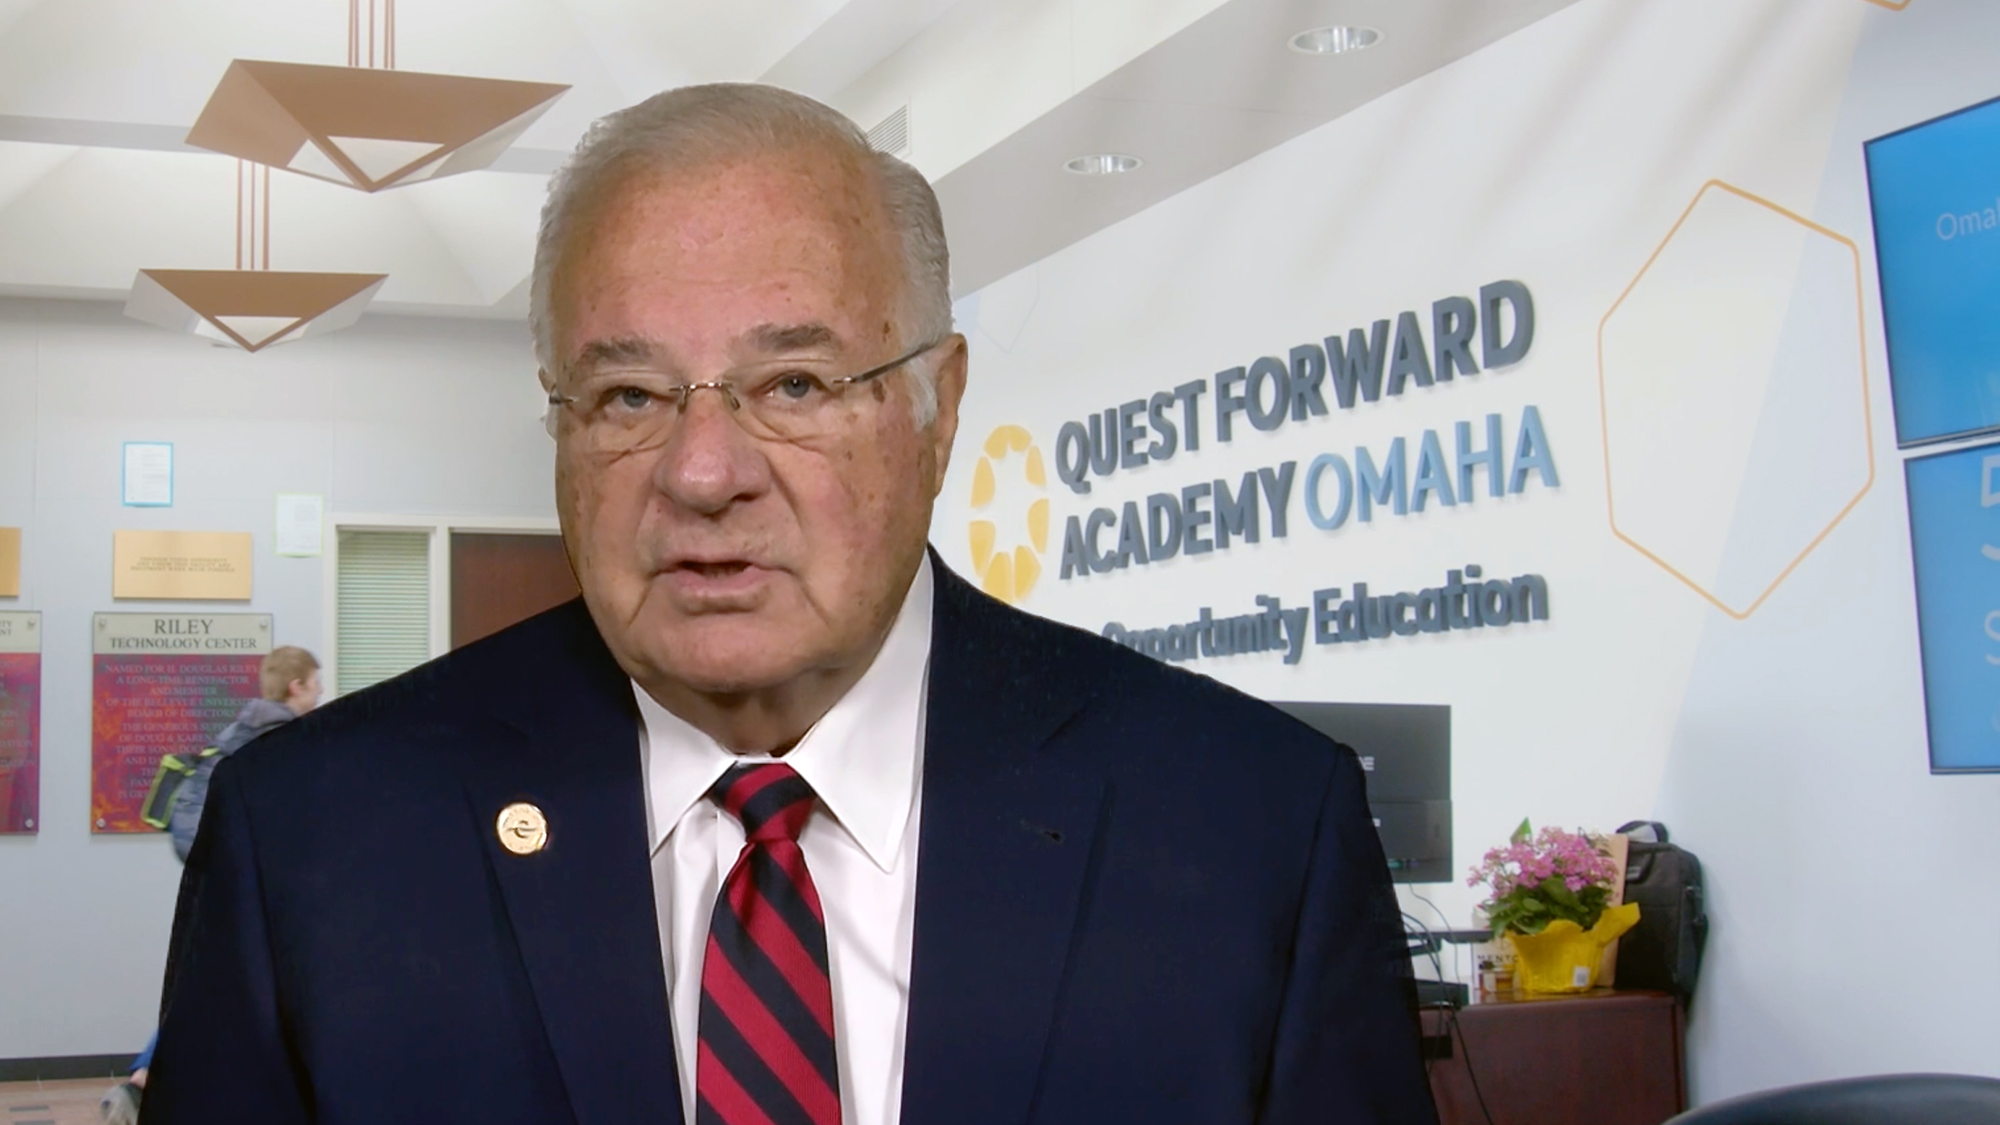 Video still: Opportunity Education founder, benefactor, and CEO Joe Ricketts